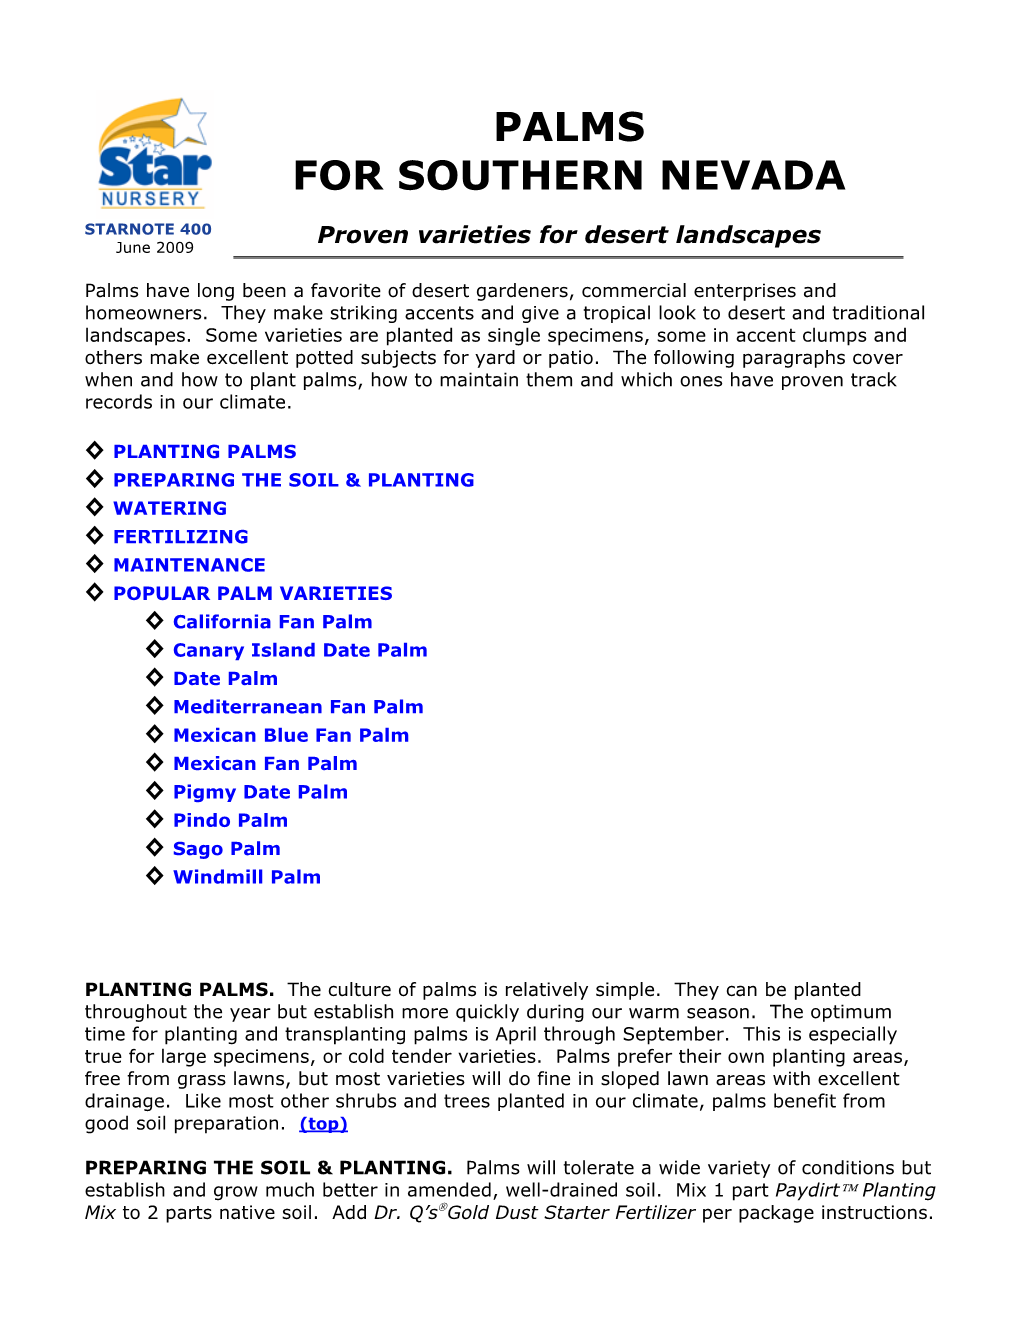 Palms for Southern Nevada